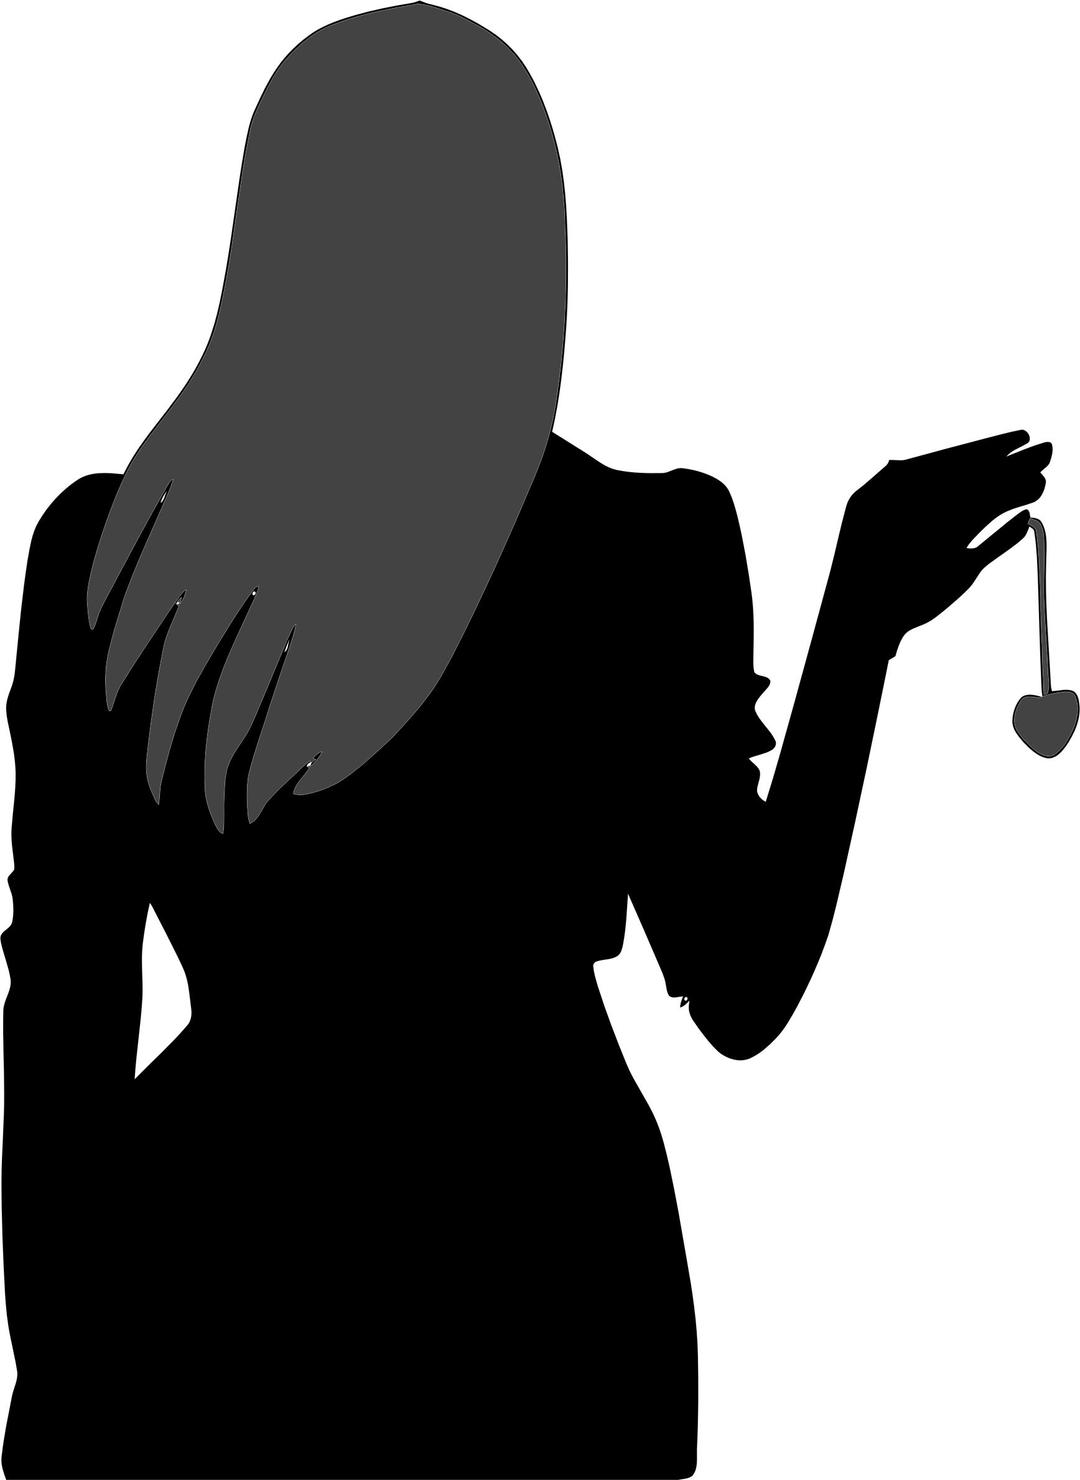 Womans Silhouette Holding Heart Locket png transparent